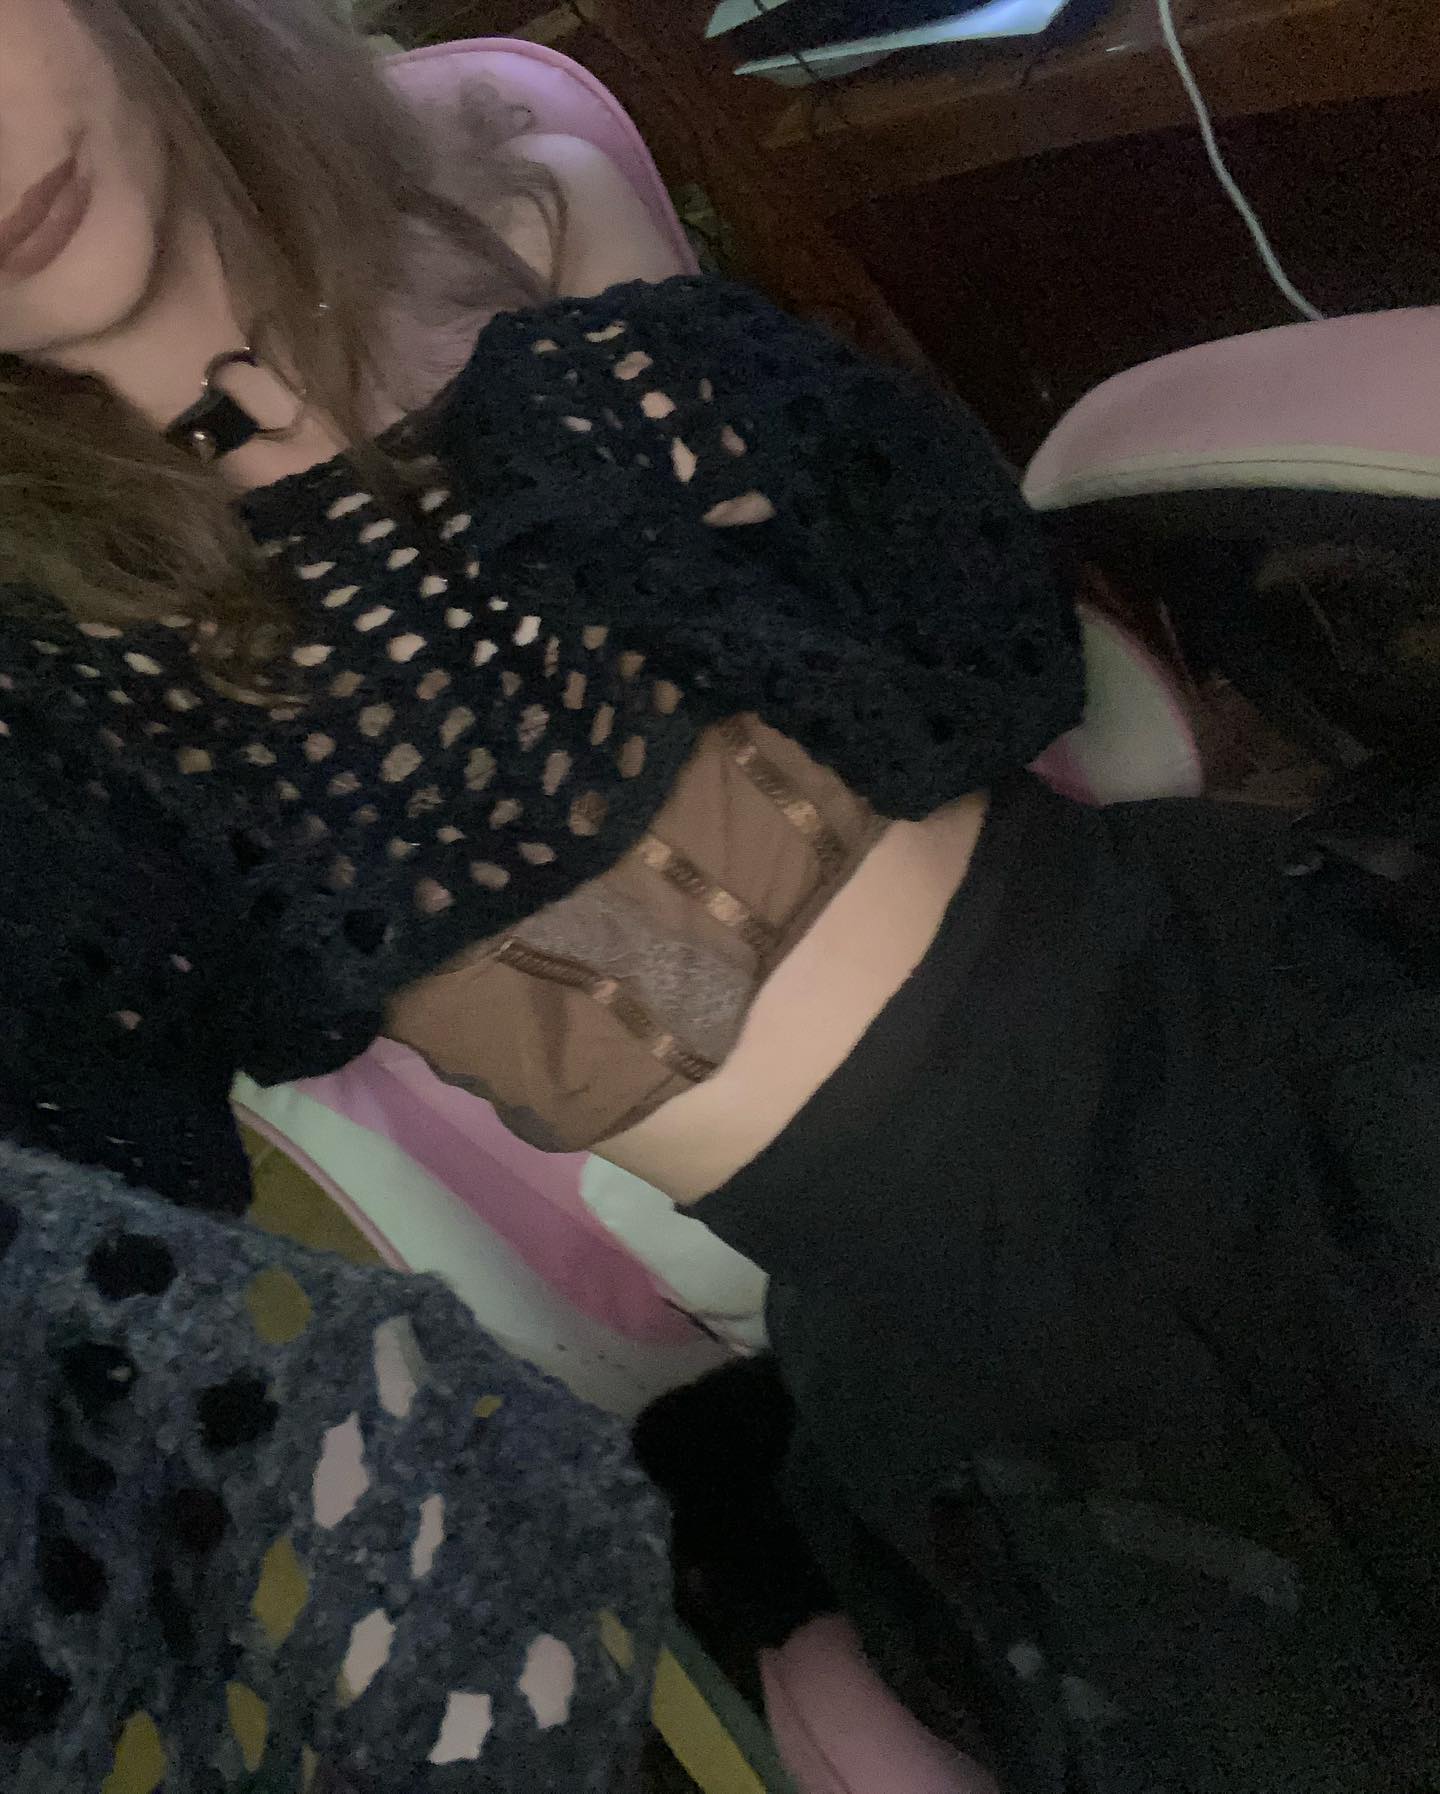 dying star ＊*•̩̩͙✩•̩̩͙*˚
•
• 
outfit ✩
skirt, leg warmers, knitted throw over ~ @romwe 
brown corset top, star phone case ~ @shein_au 

tags #aesthetic #outfitinspo #onlyfans #alt #alternative #onlyfangirl #onlyfriends #outfitoftheday #ootd #contentcreator